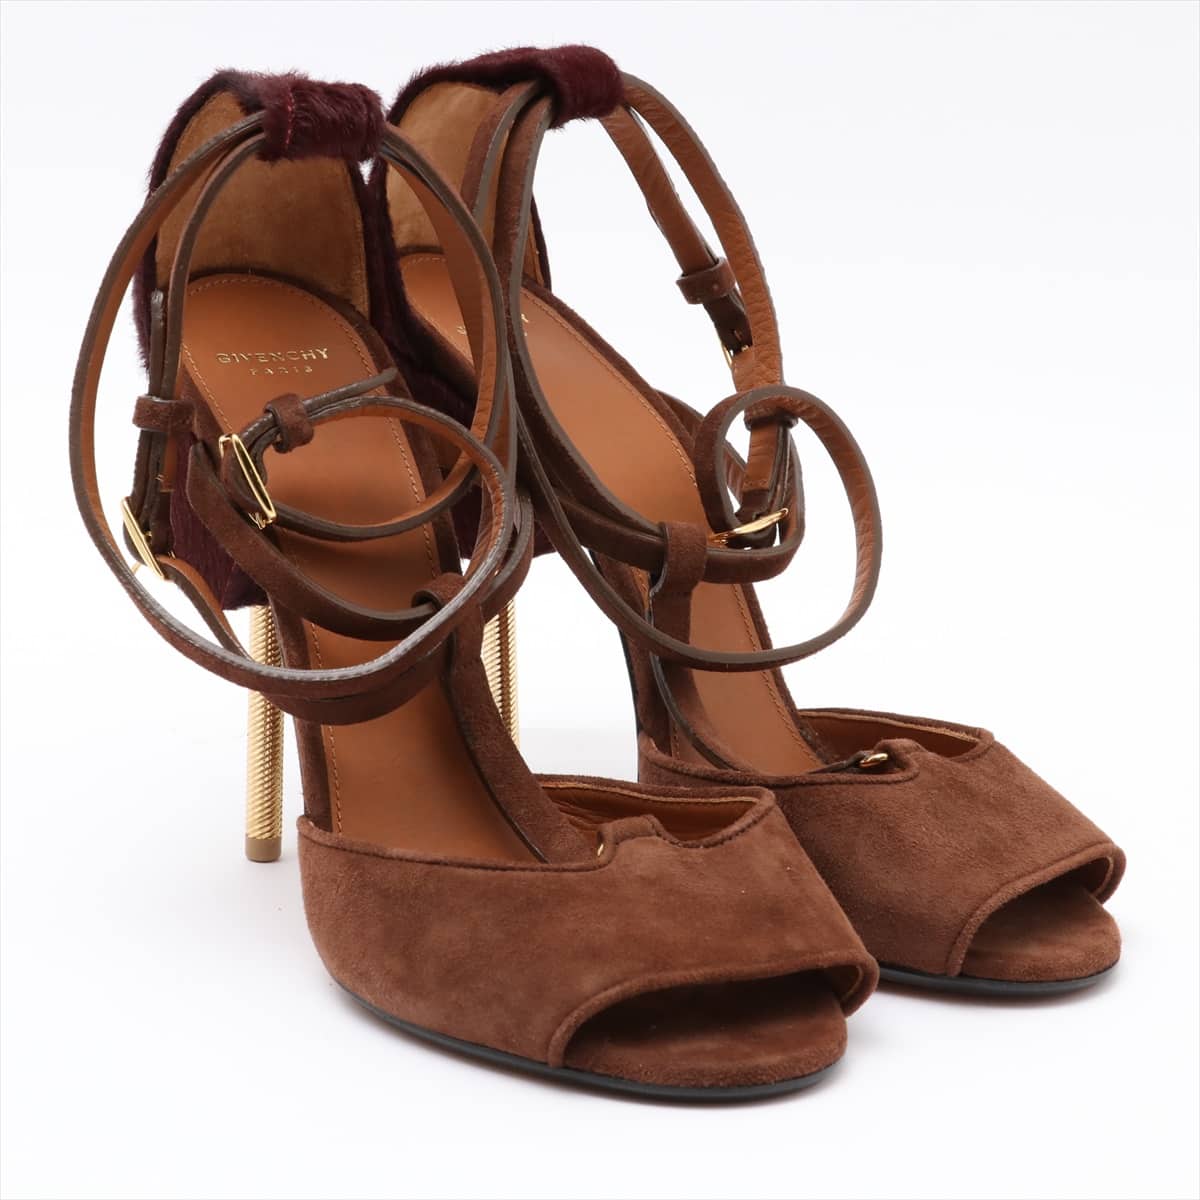 Givenchy Suede Sandals 40 Ladies' Brown